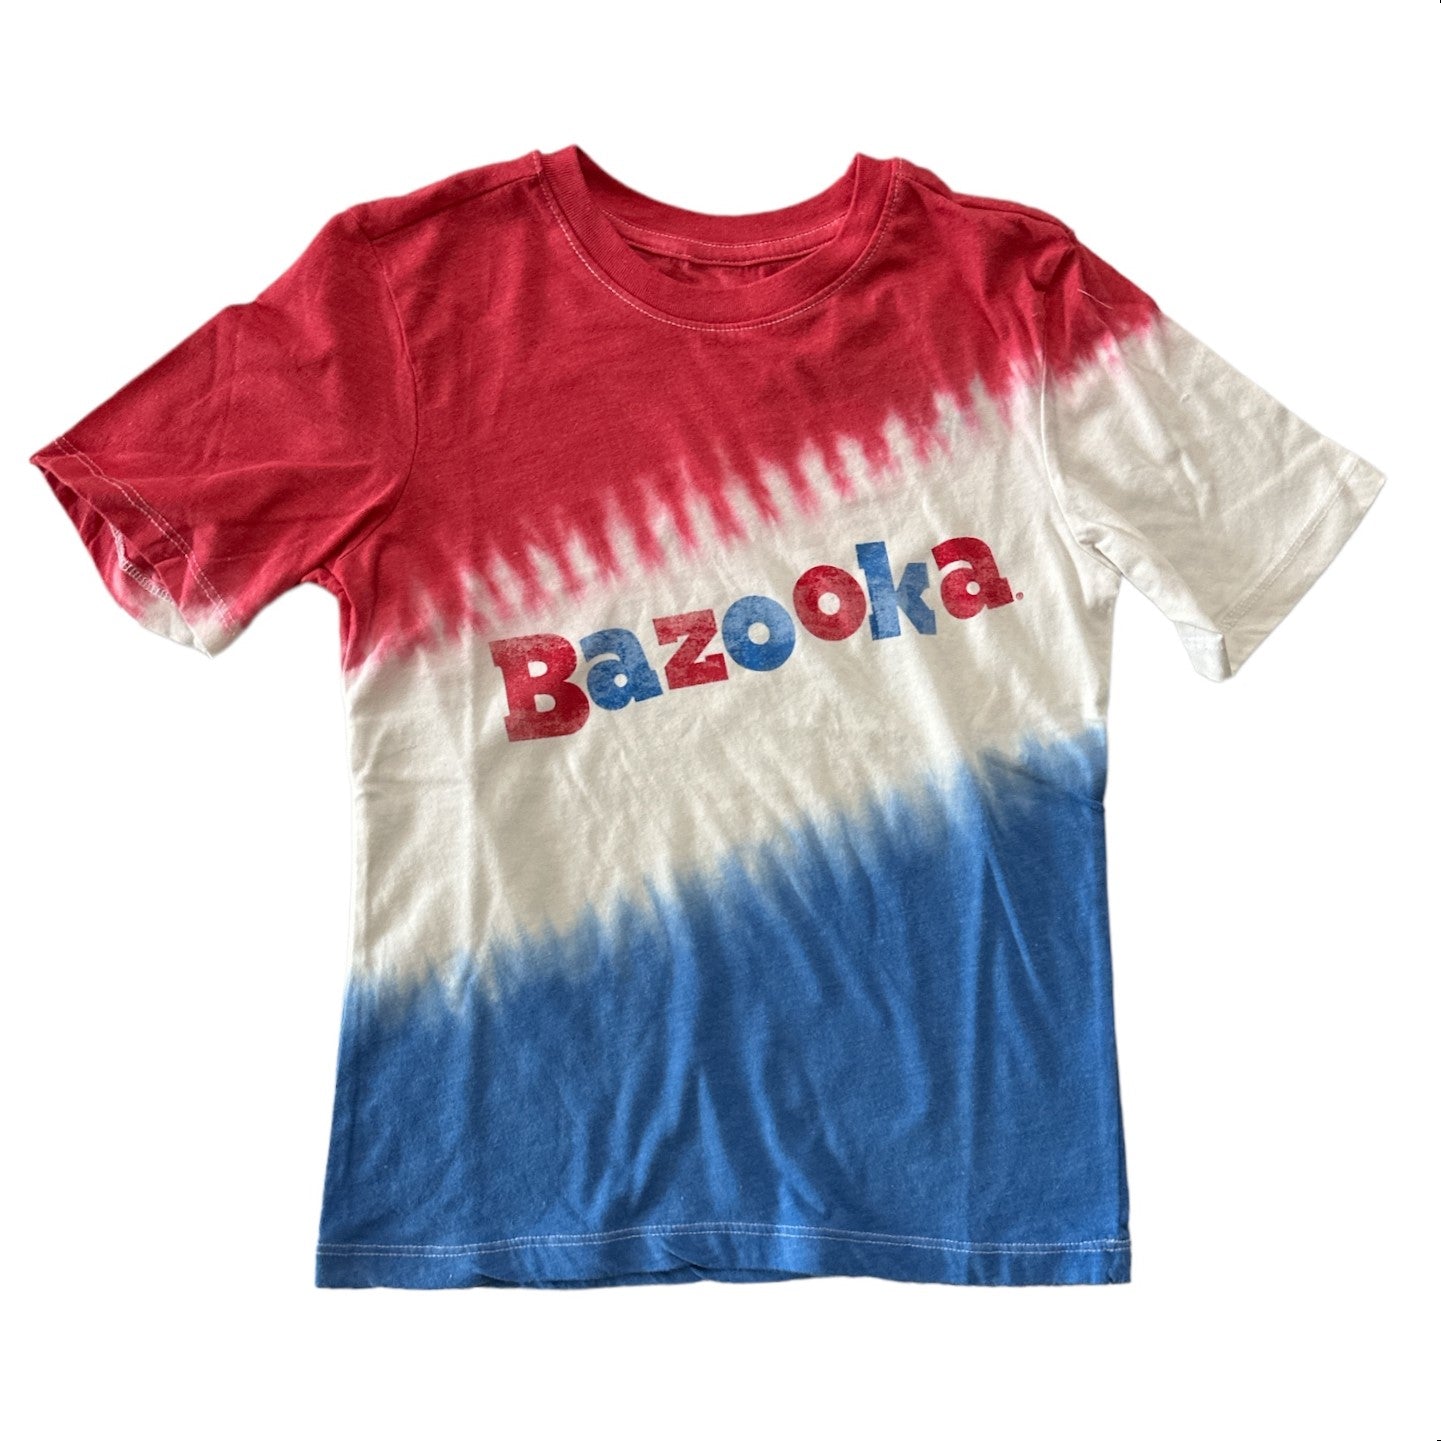 Bazooka Licensed Boy's Tie Dyed Graphic Brand Short Sleeve T-Shirt